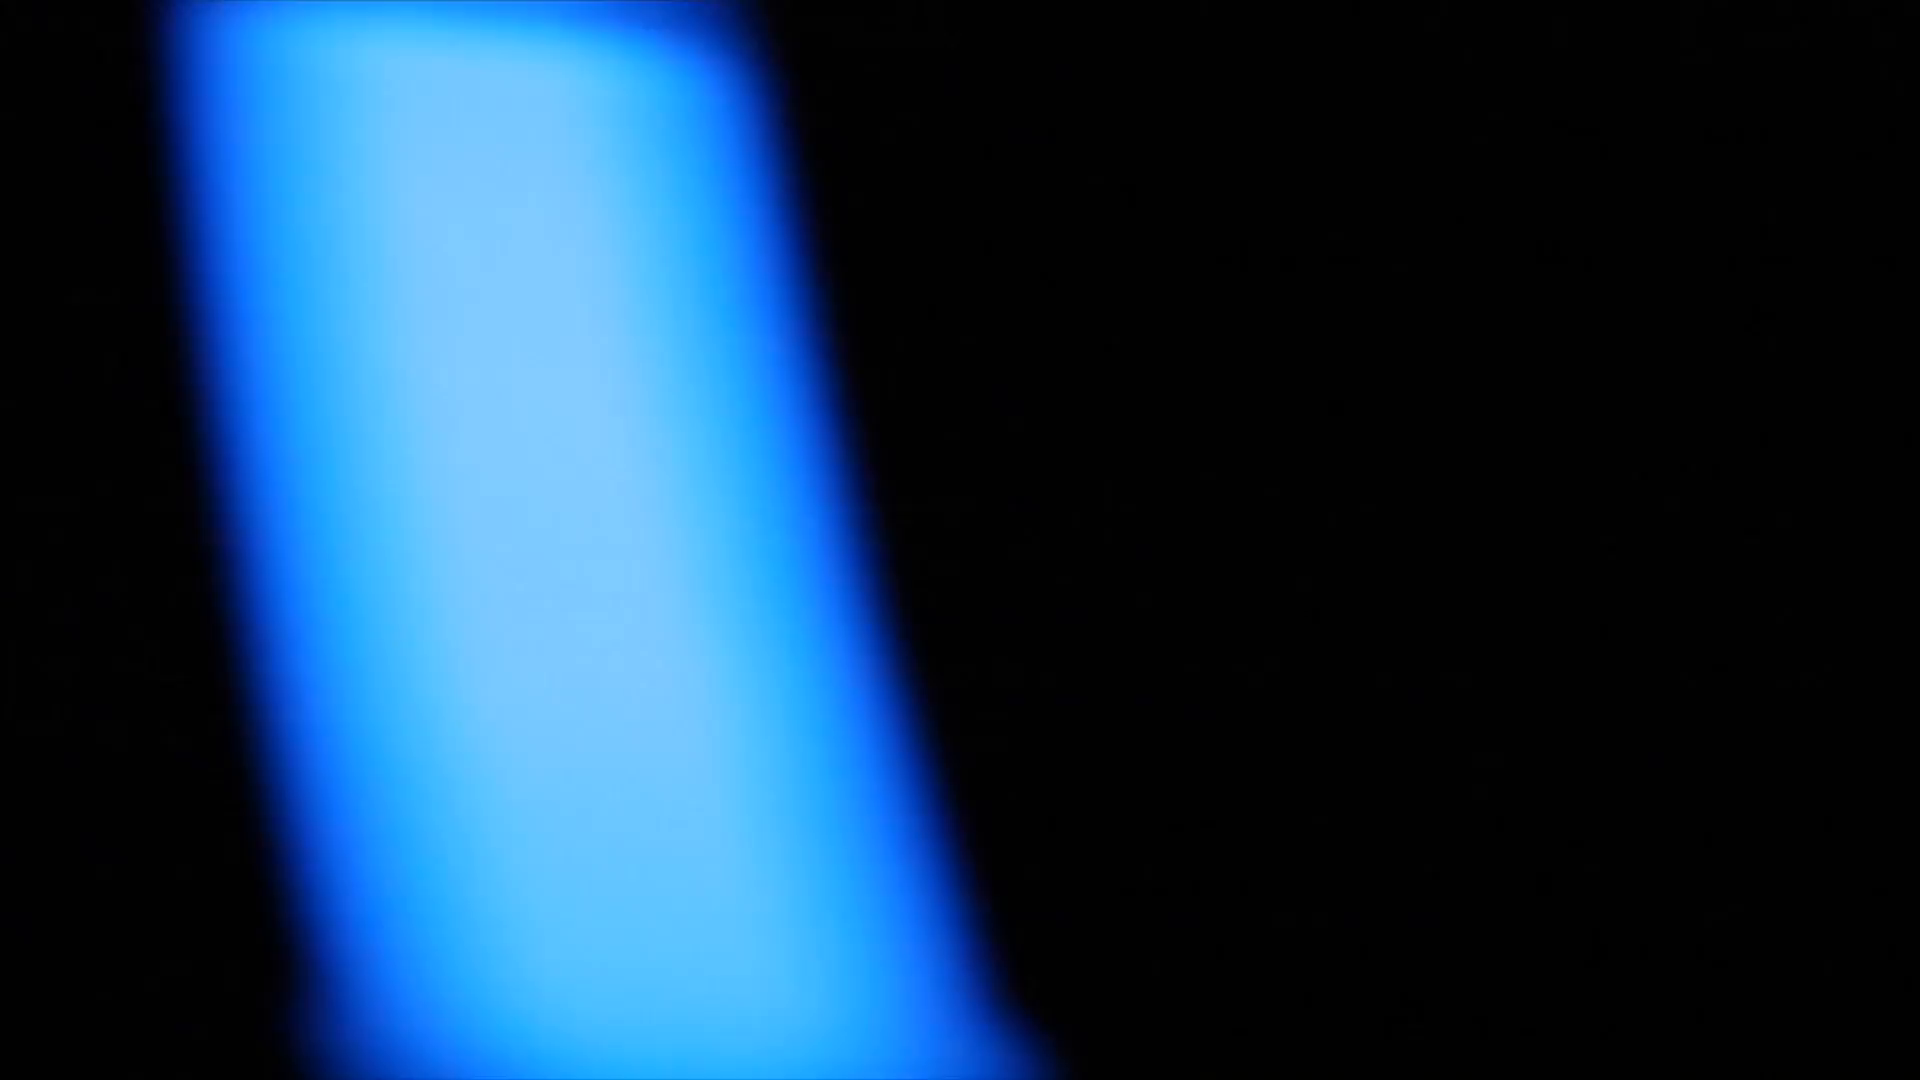 Fluorescent blue light moving from side to side on black background ...